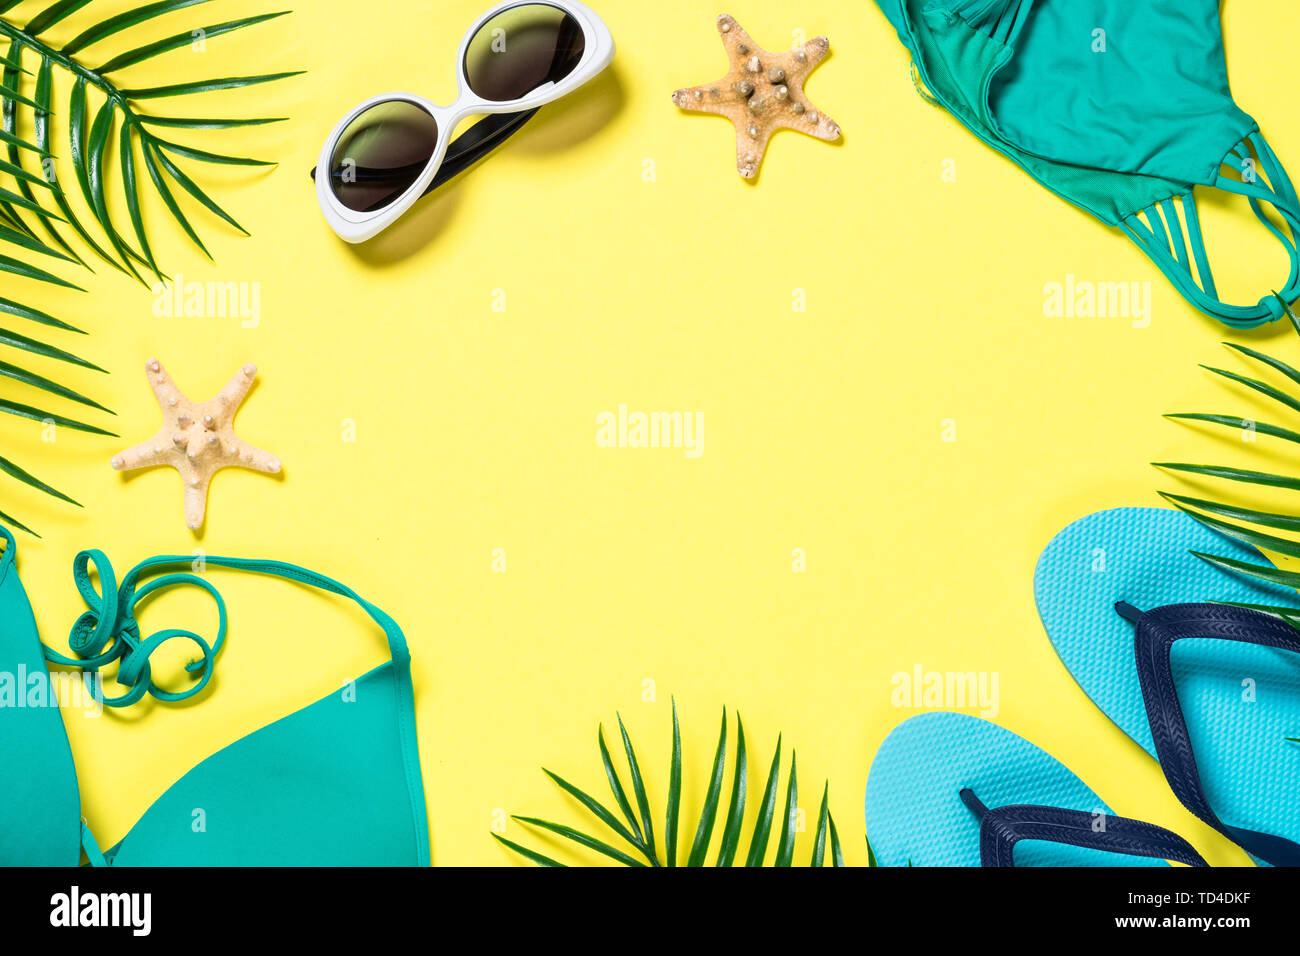 Tropical palm leaves, flip flops and starfish. Summer background. Flat lay image with copy space. Stock Photo